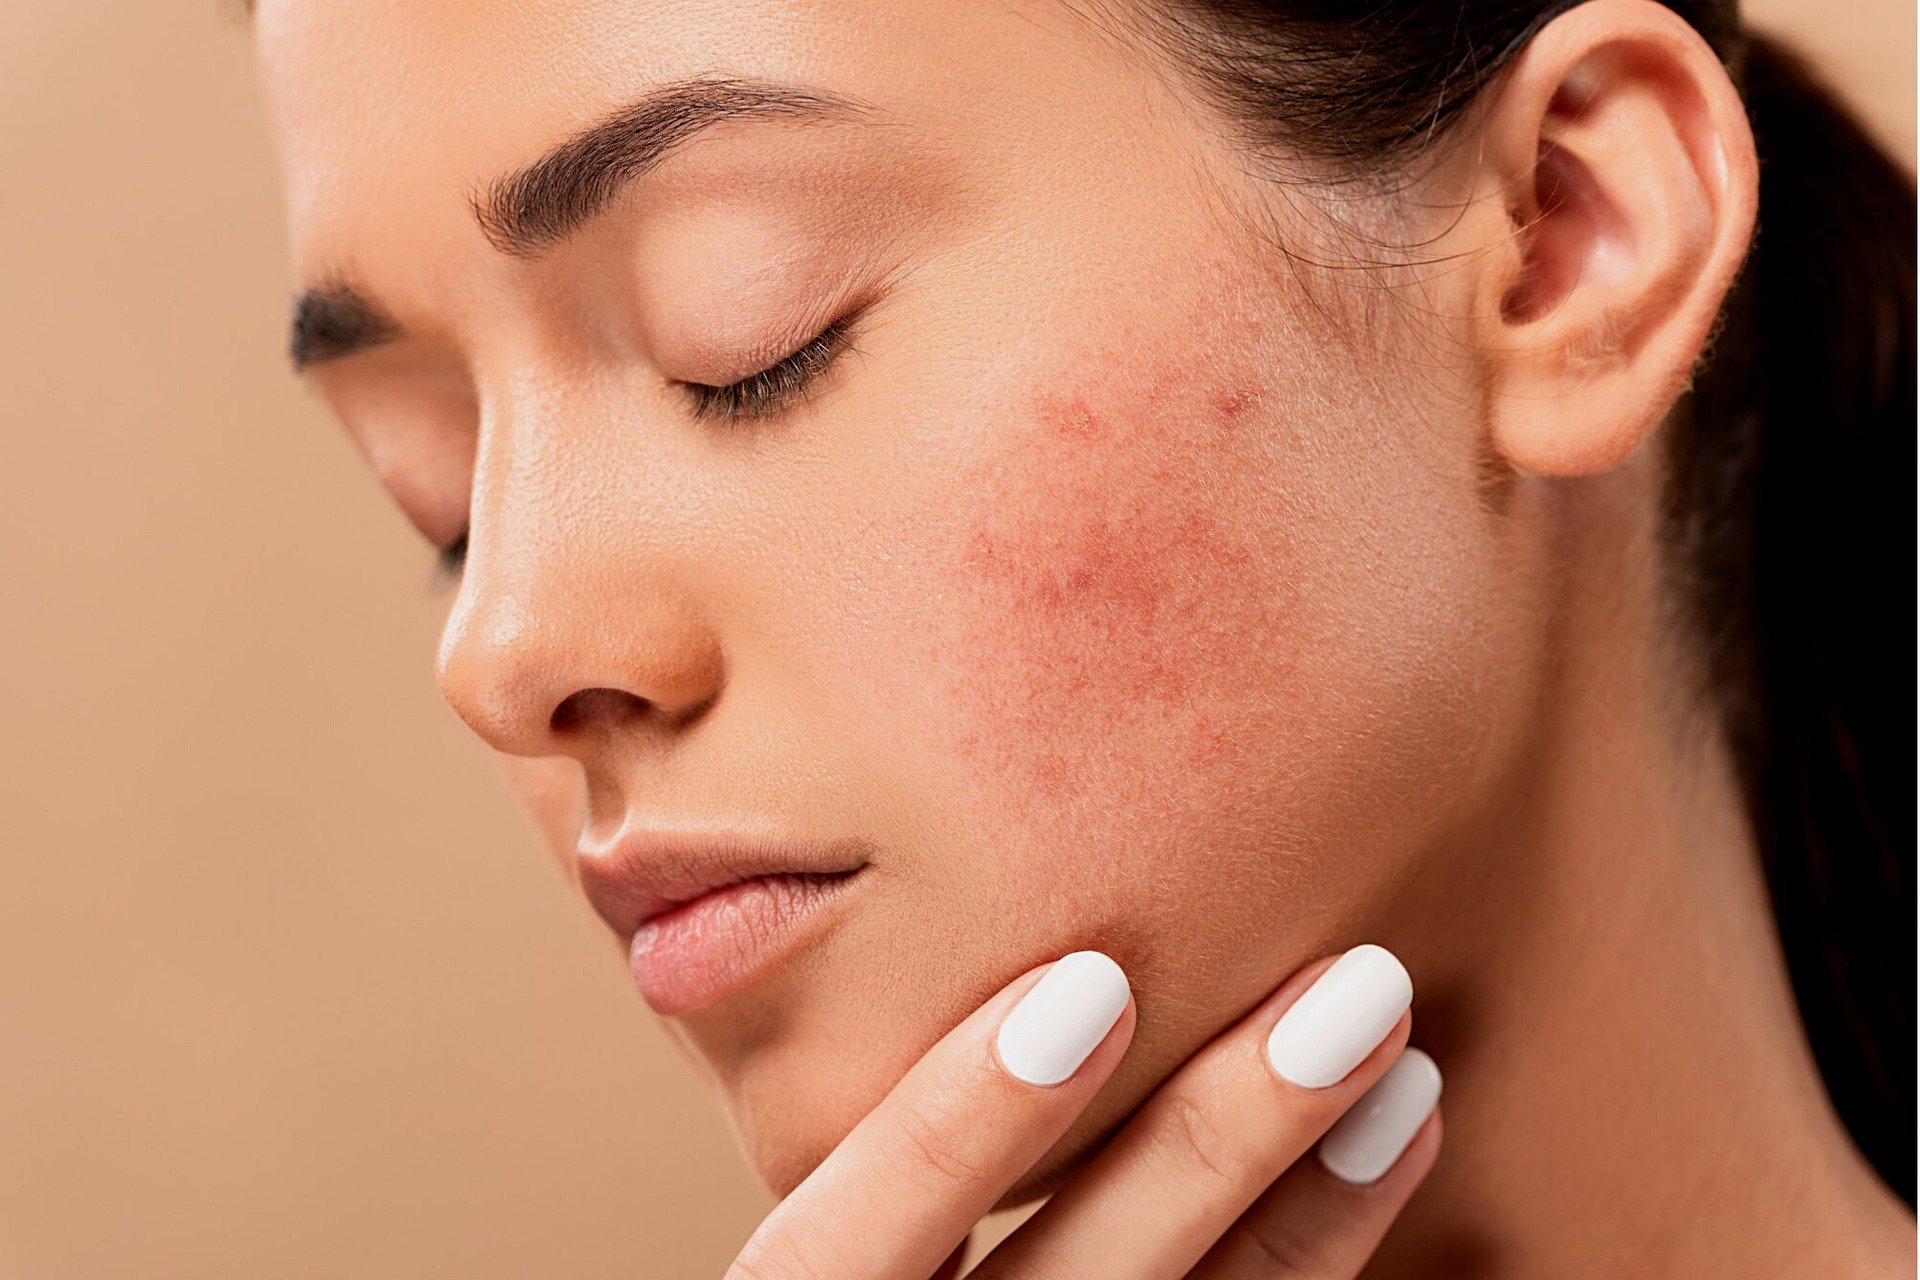 Causes of adult acne